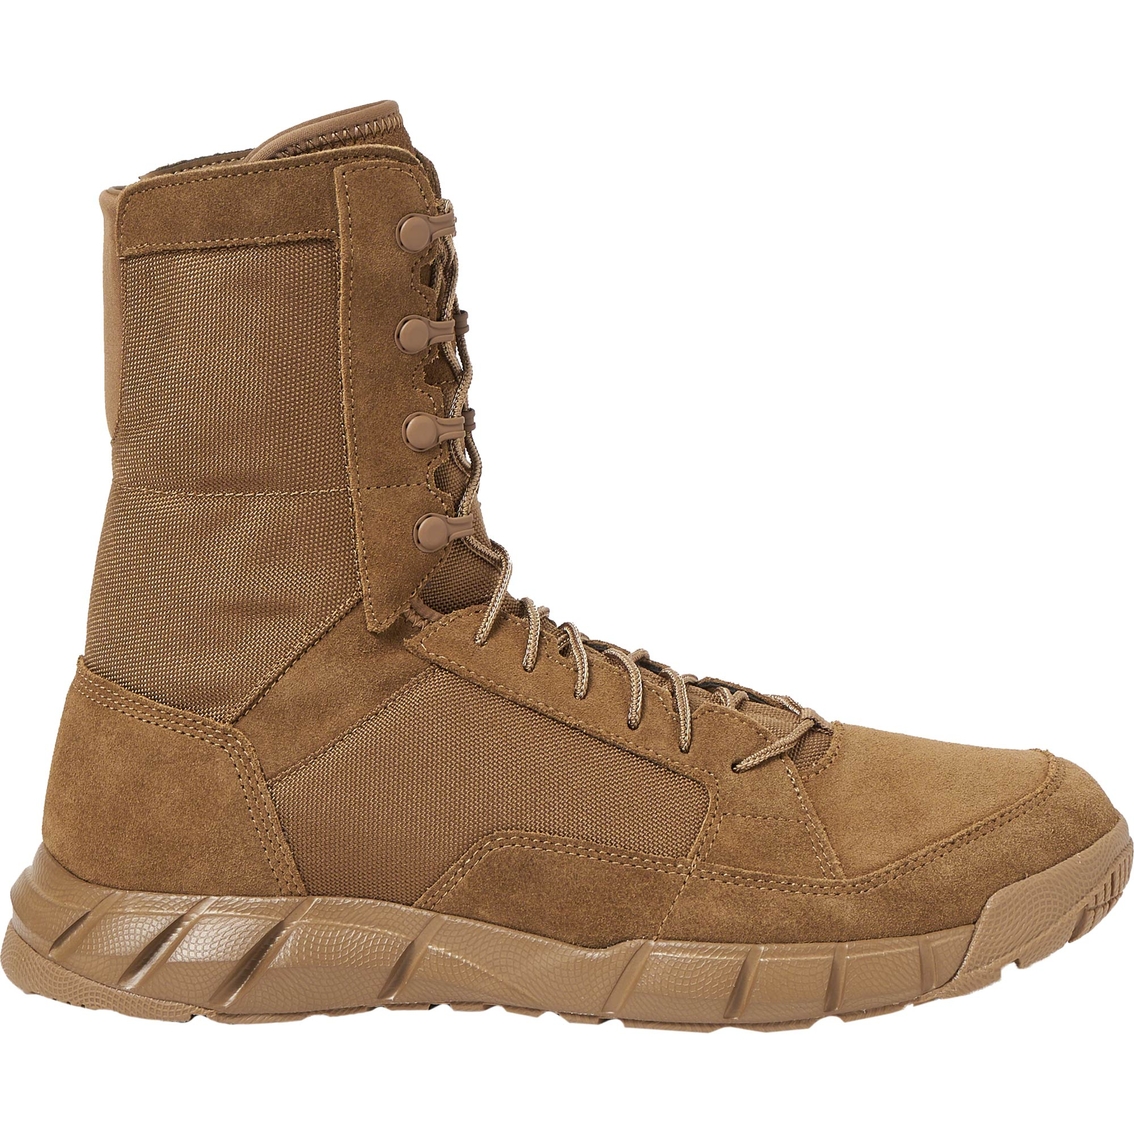 Oakley Light Assault 2 Boots Coyote | Boots | Military | Shop The